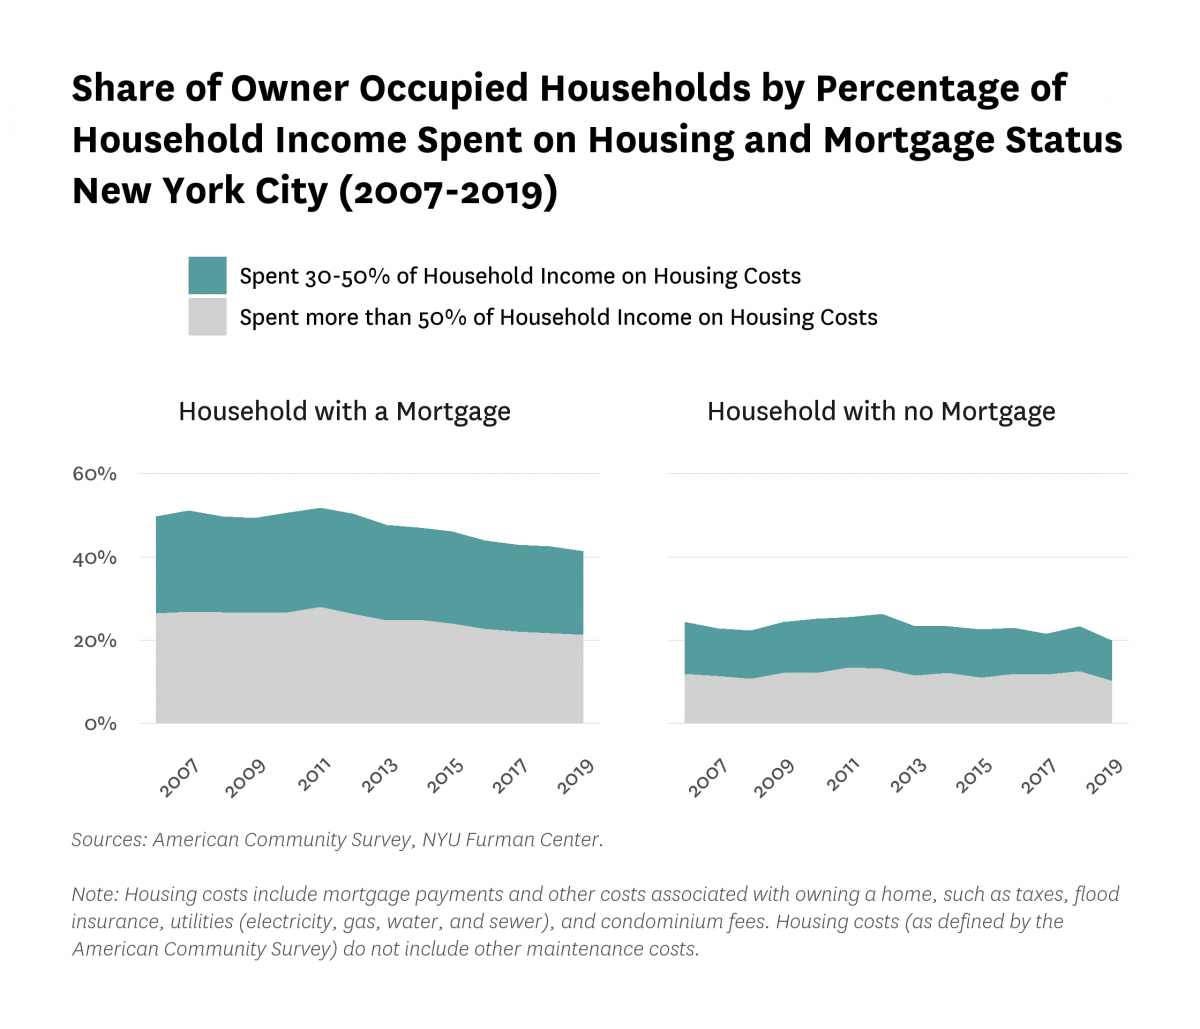 Area chart comparing the share of owner-occupied households by percentage of household income spent on housing and mortgage status in New York City between 2007 and 2019.